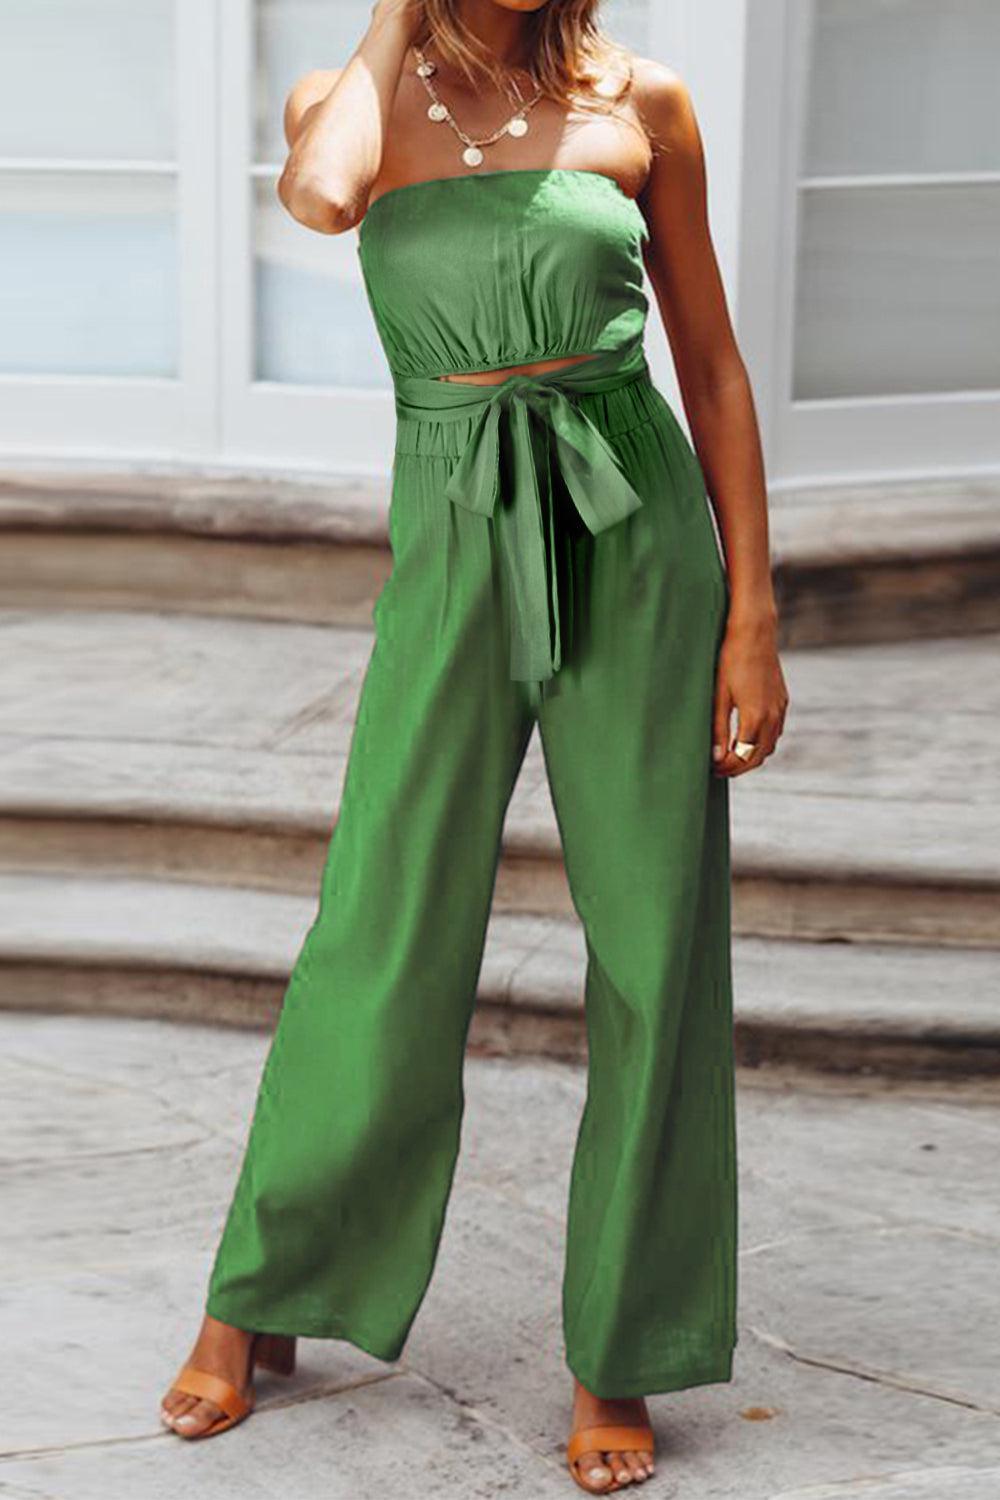 a woman wearing a green strapless jumpsuit